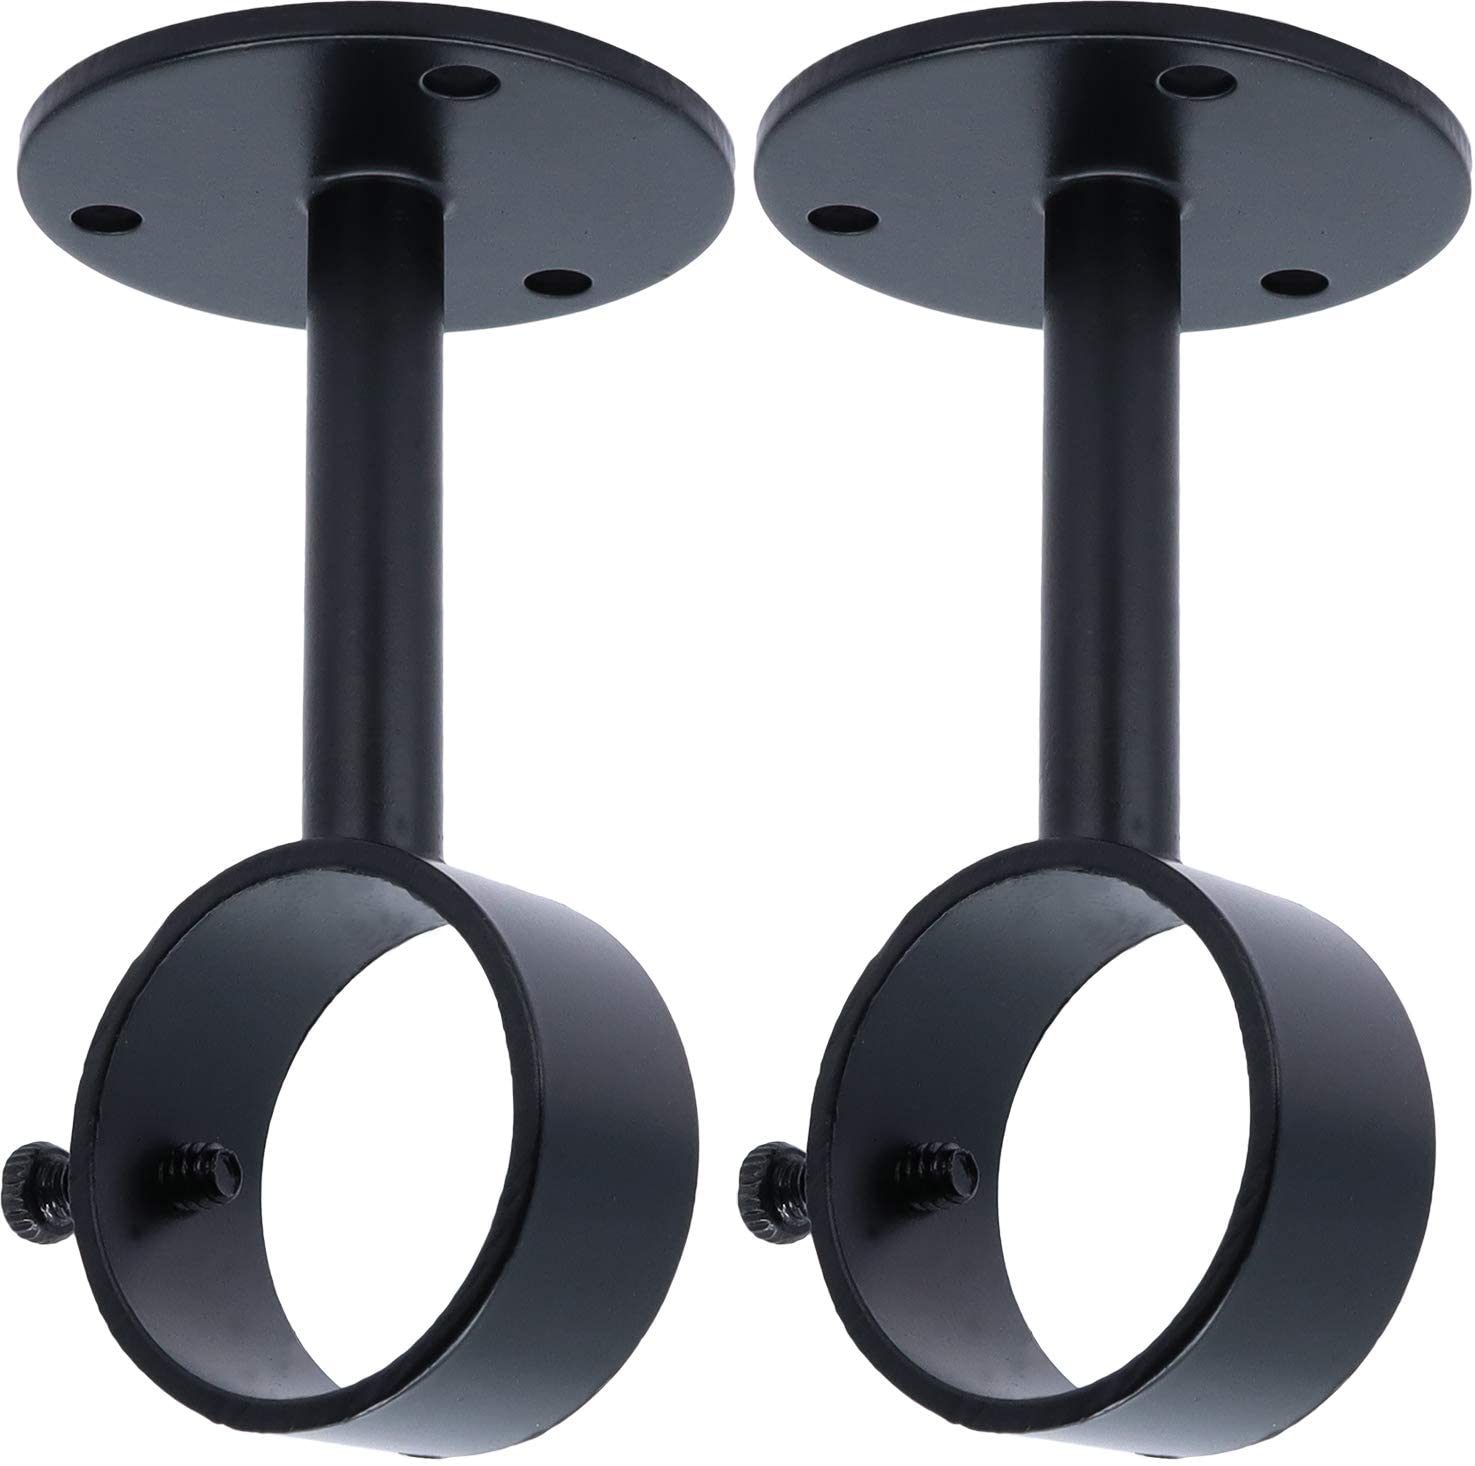 MERIVILLE Ceiling-Mounted or Wall-Mounted Curtain Rod Brackets, for up to 1 ¼” Diameter Drapery Rods, 2 PCs, Black